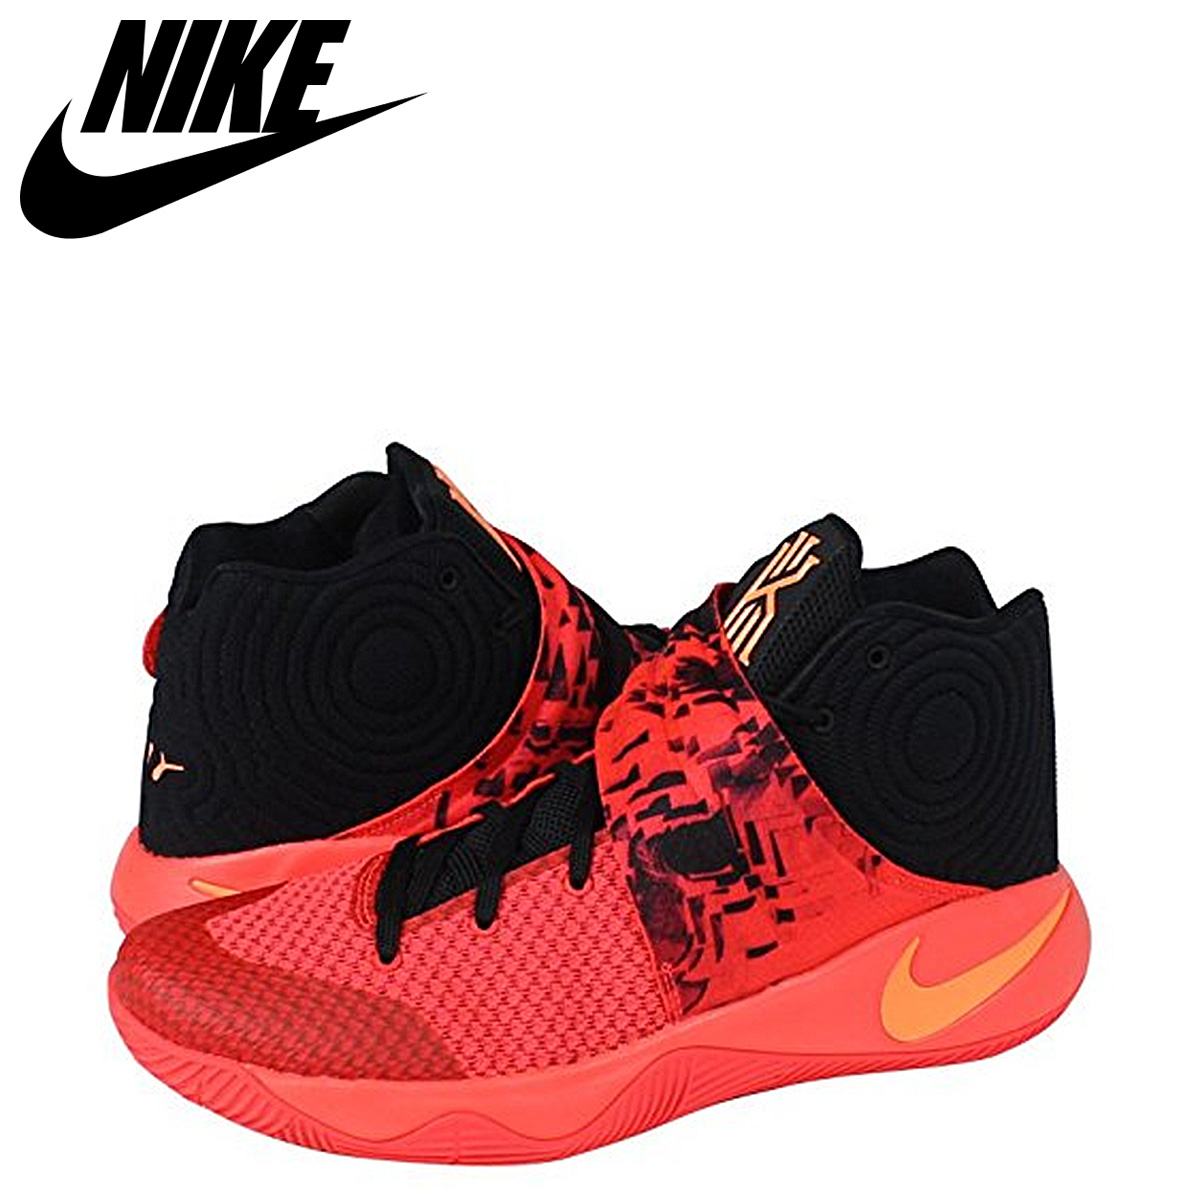 kyrie inferno shoes cheap online